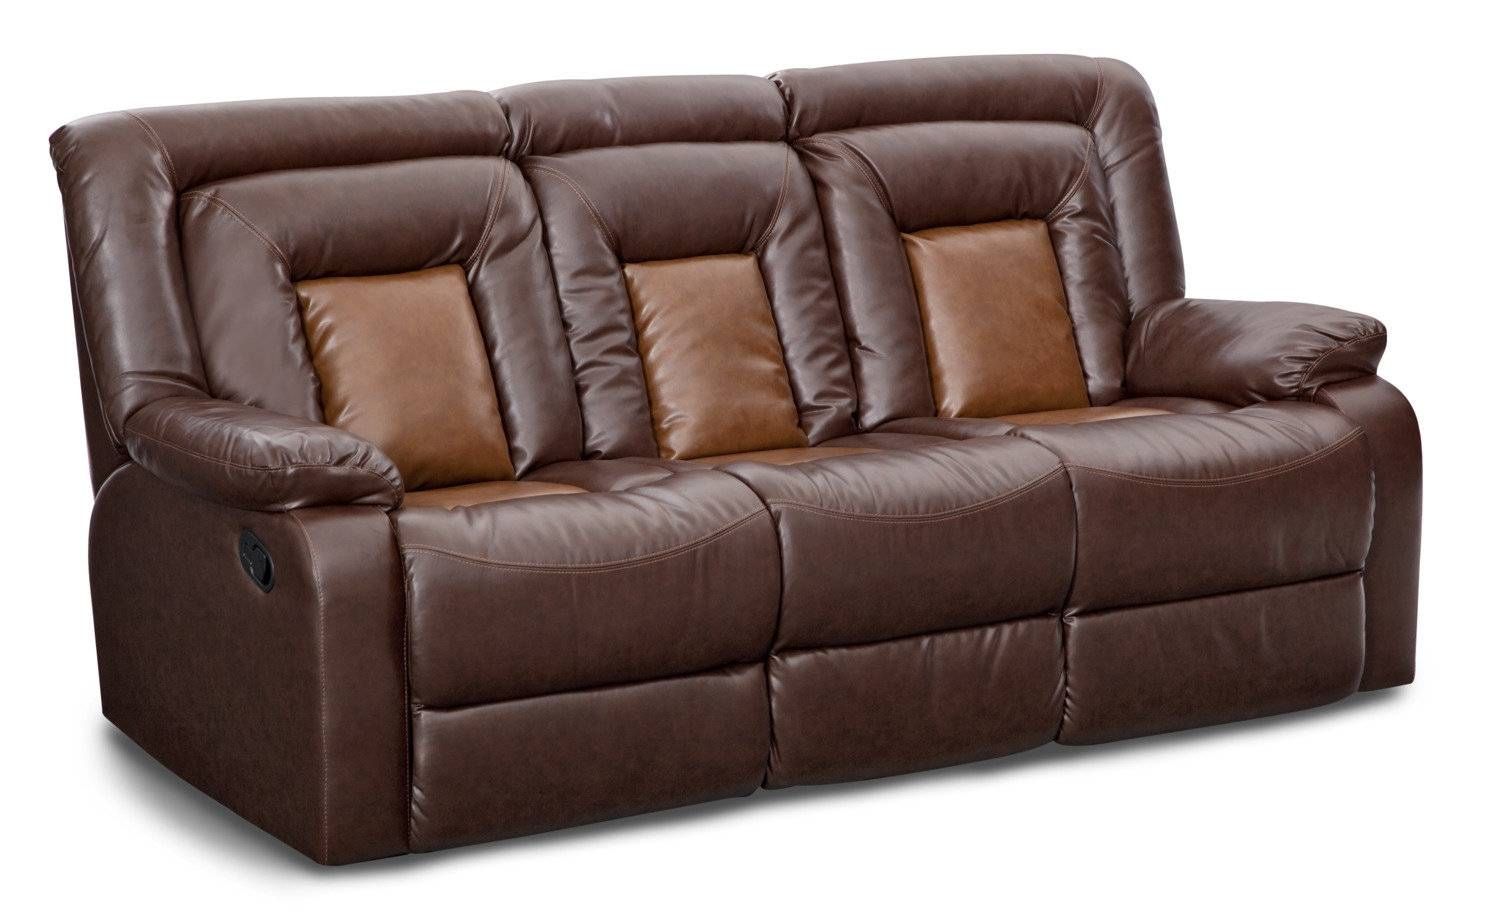 best camping sofa bed